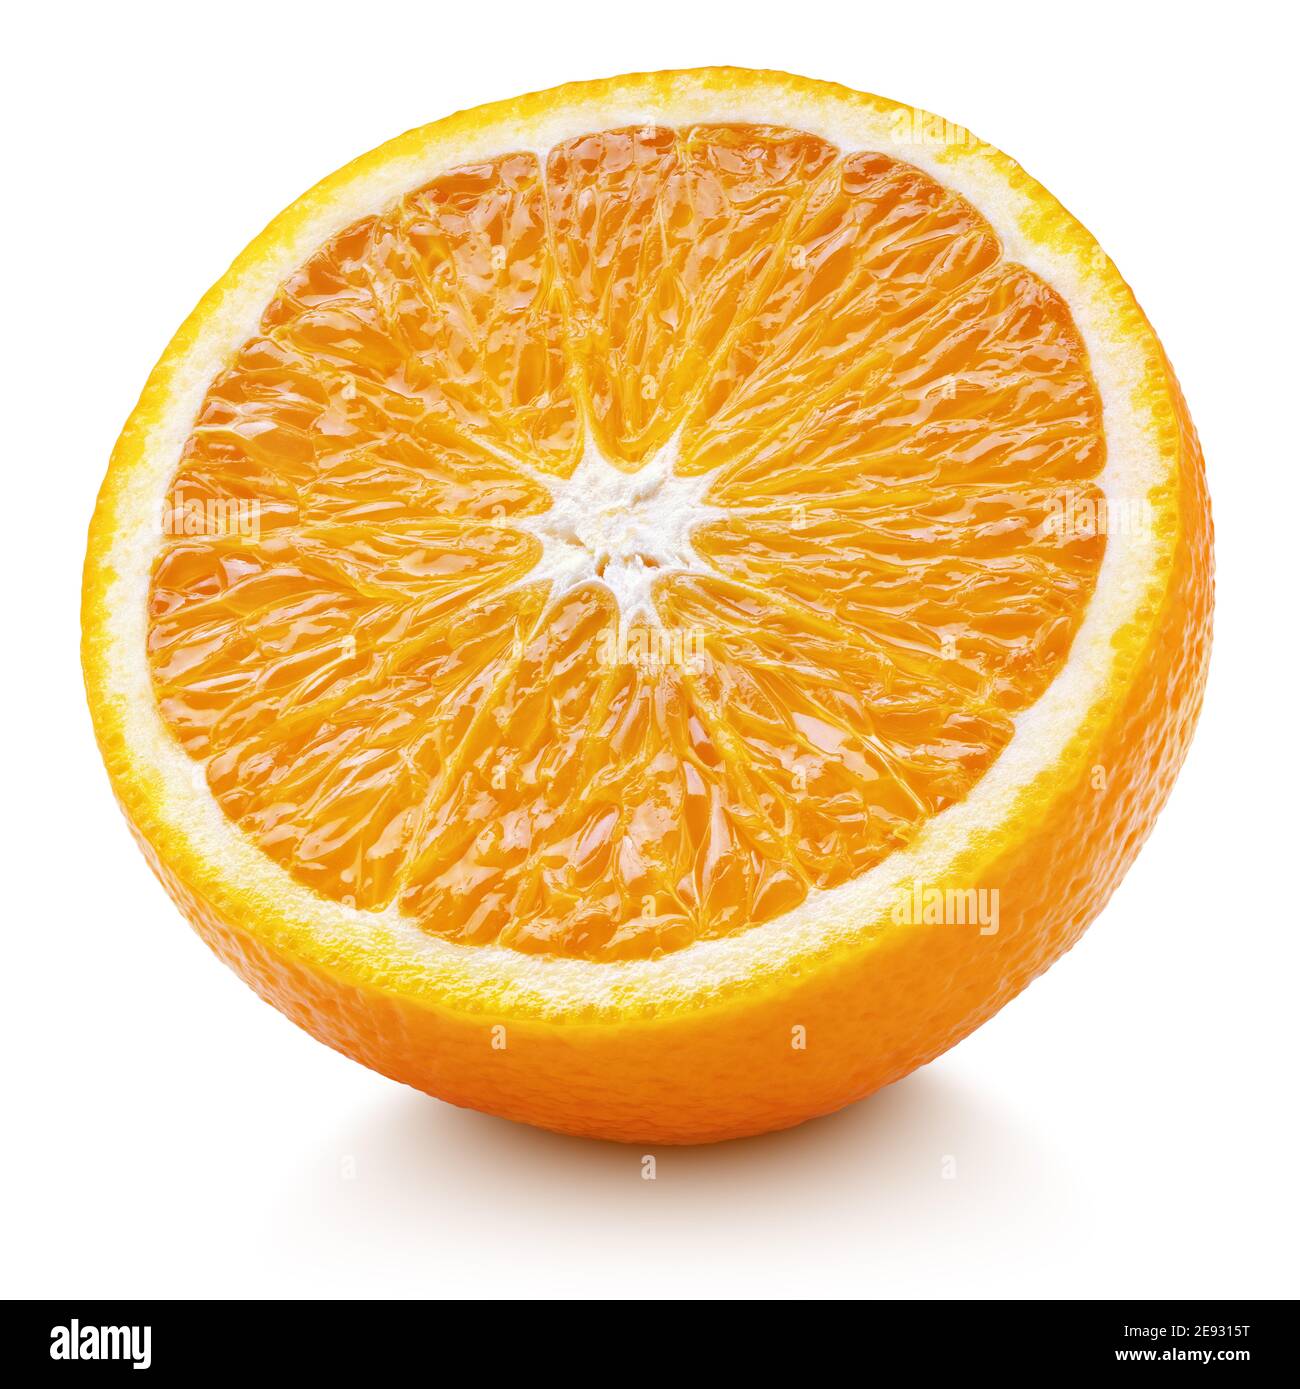 Ripe half of orange citrus fruit isolated on white background with clipping path. Full depth of field. Stock Photo